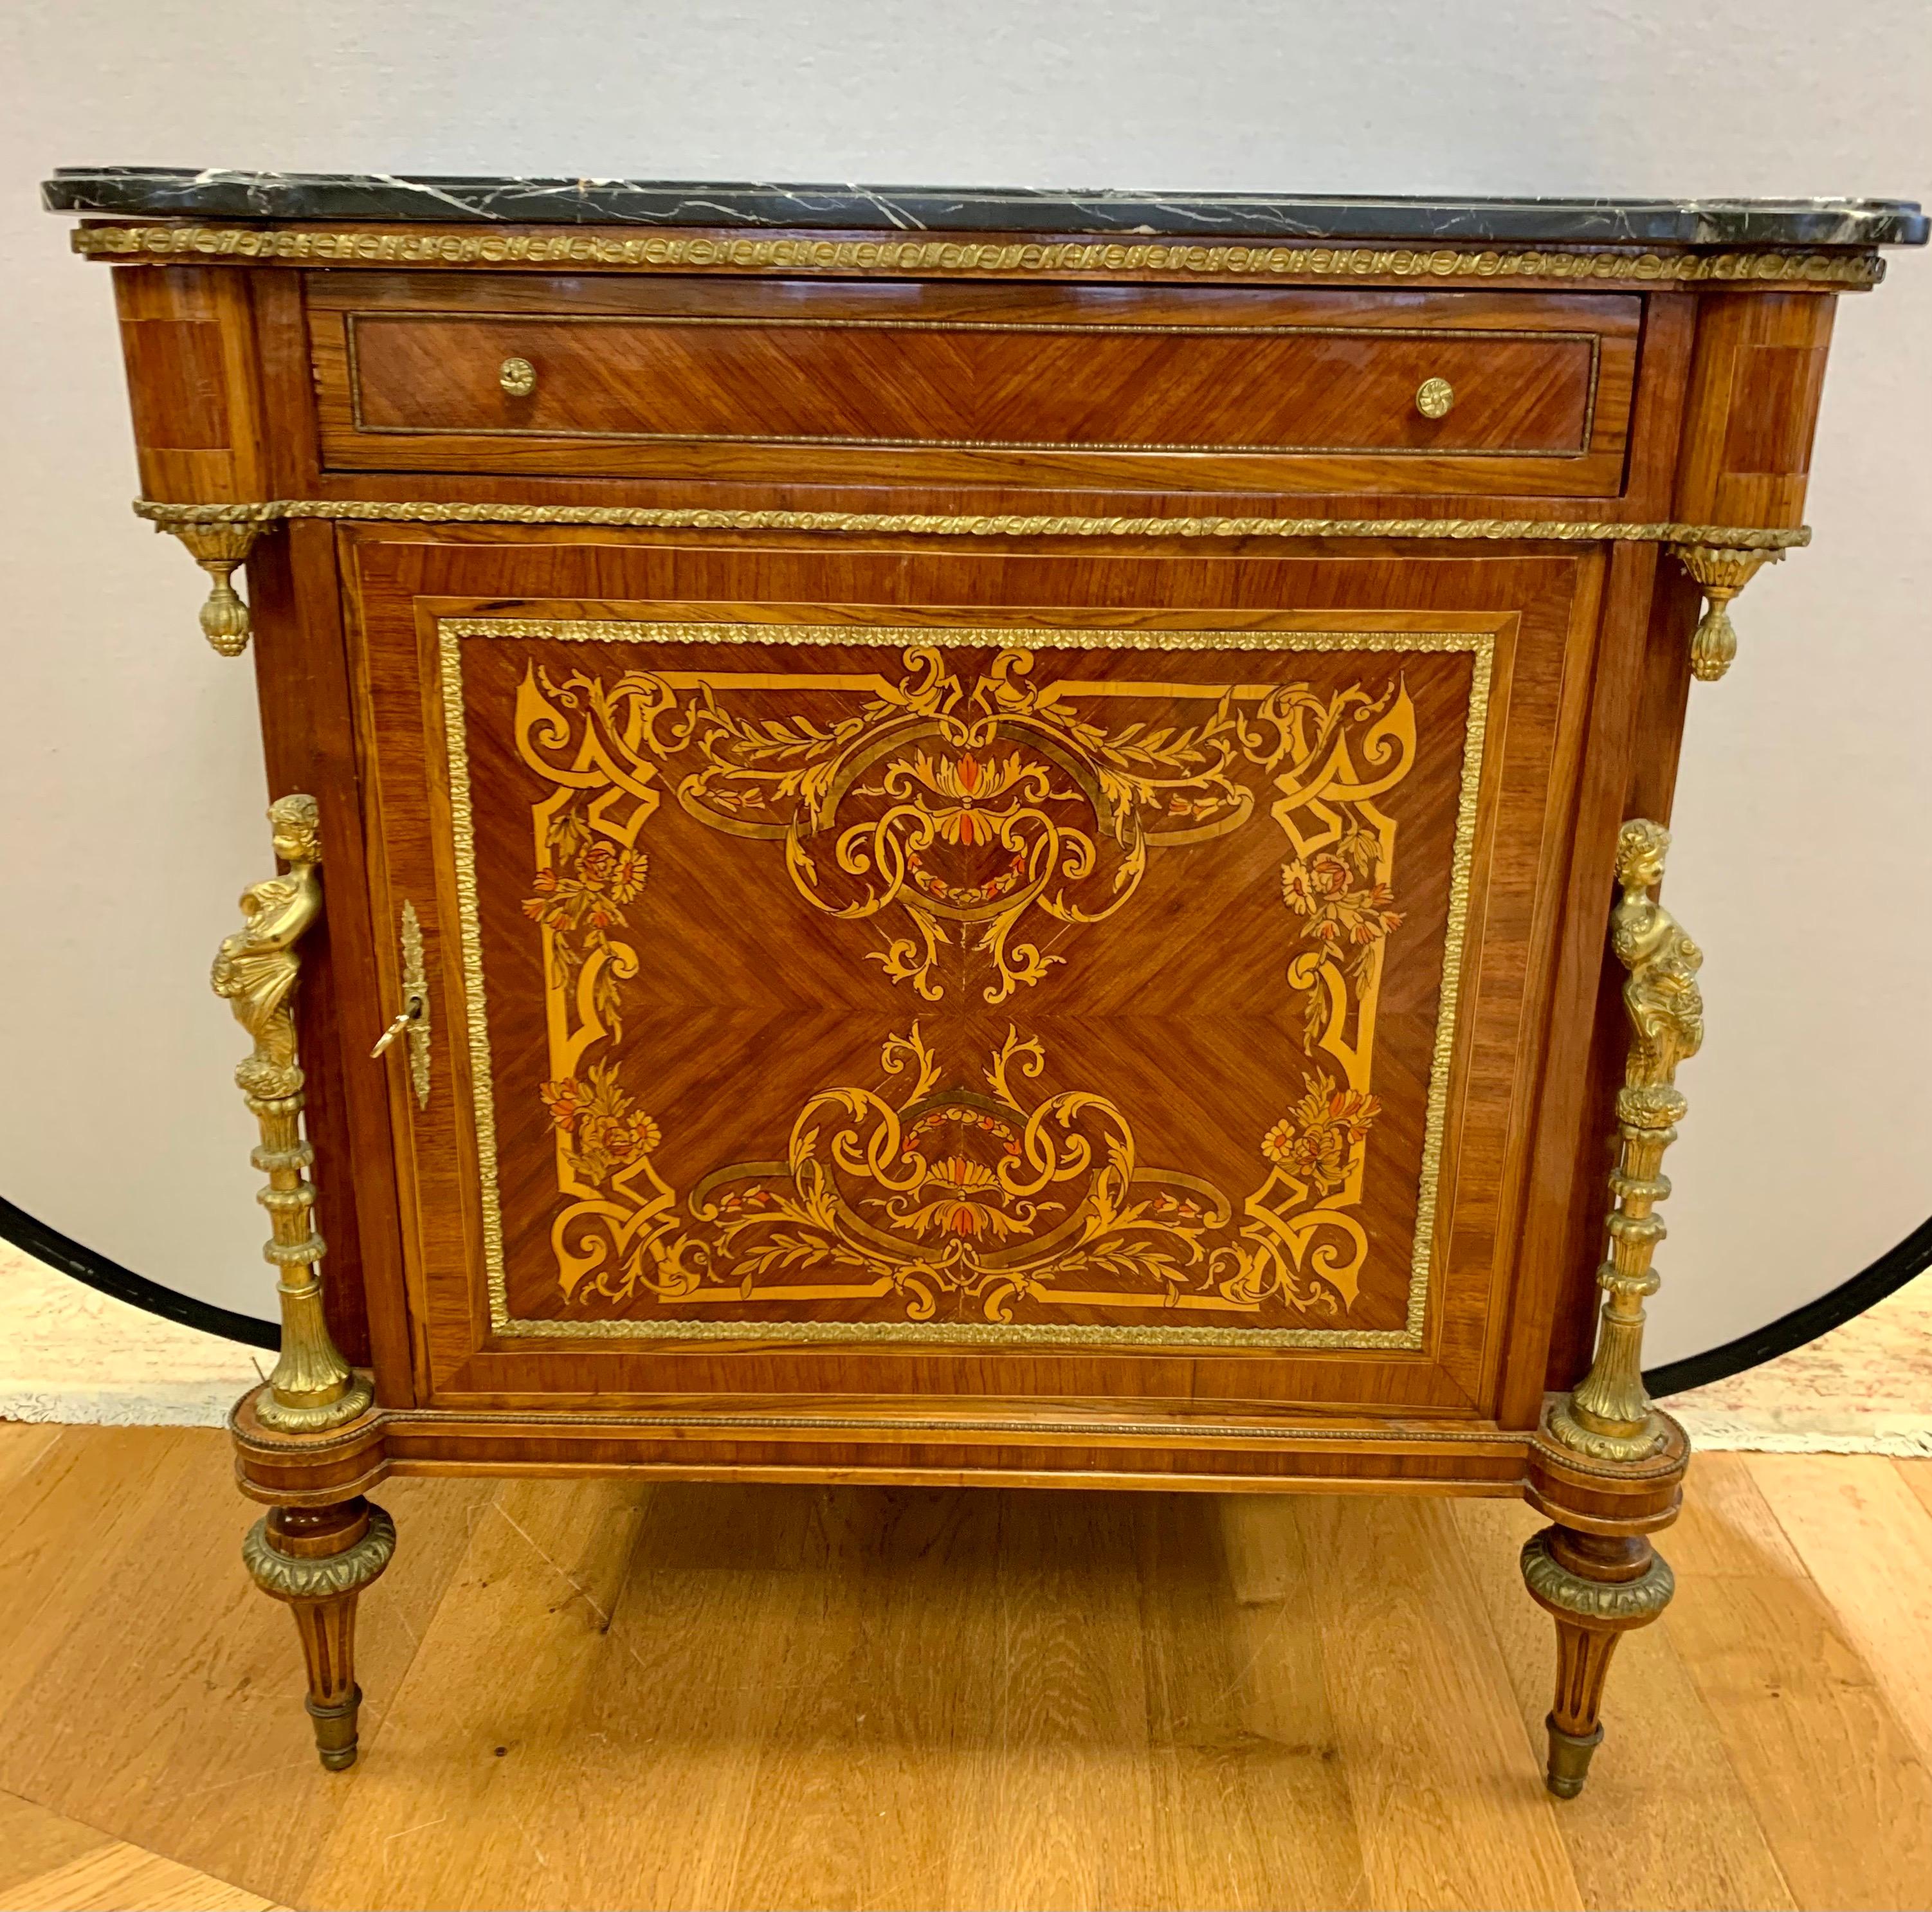 Magnificent 19th century Louis XVI style marble top chest that features heavy veining in the marble,  bronze ormolu figural mounts and marquetry at front and sides. There is a repair at the left lower portion of the marble that does not diminish the